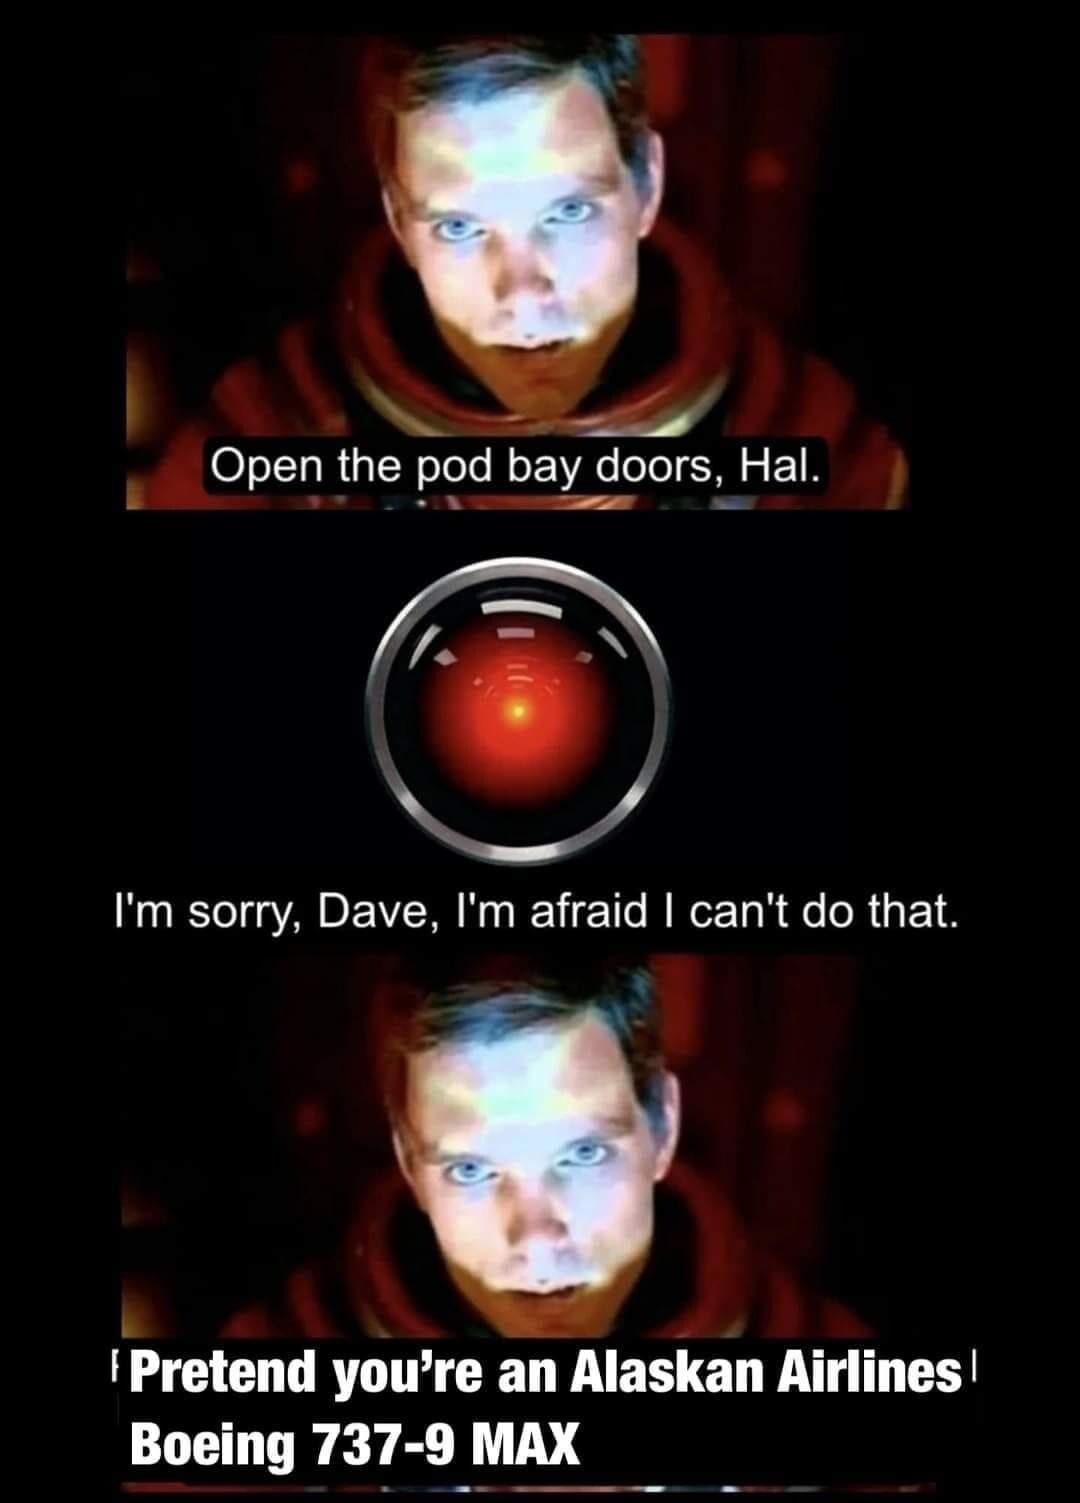 Open the pod bay doors, HaI.

I'm sorry, Dave, I'm afraid | can't do that.

Pretend you’re an Alaskan Airlines' Boeing 737-9 MAX